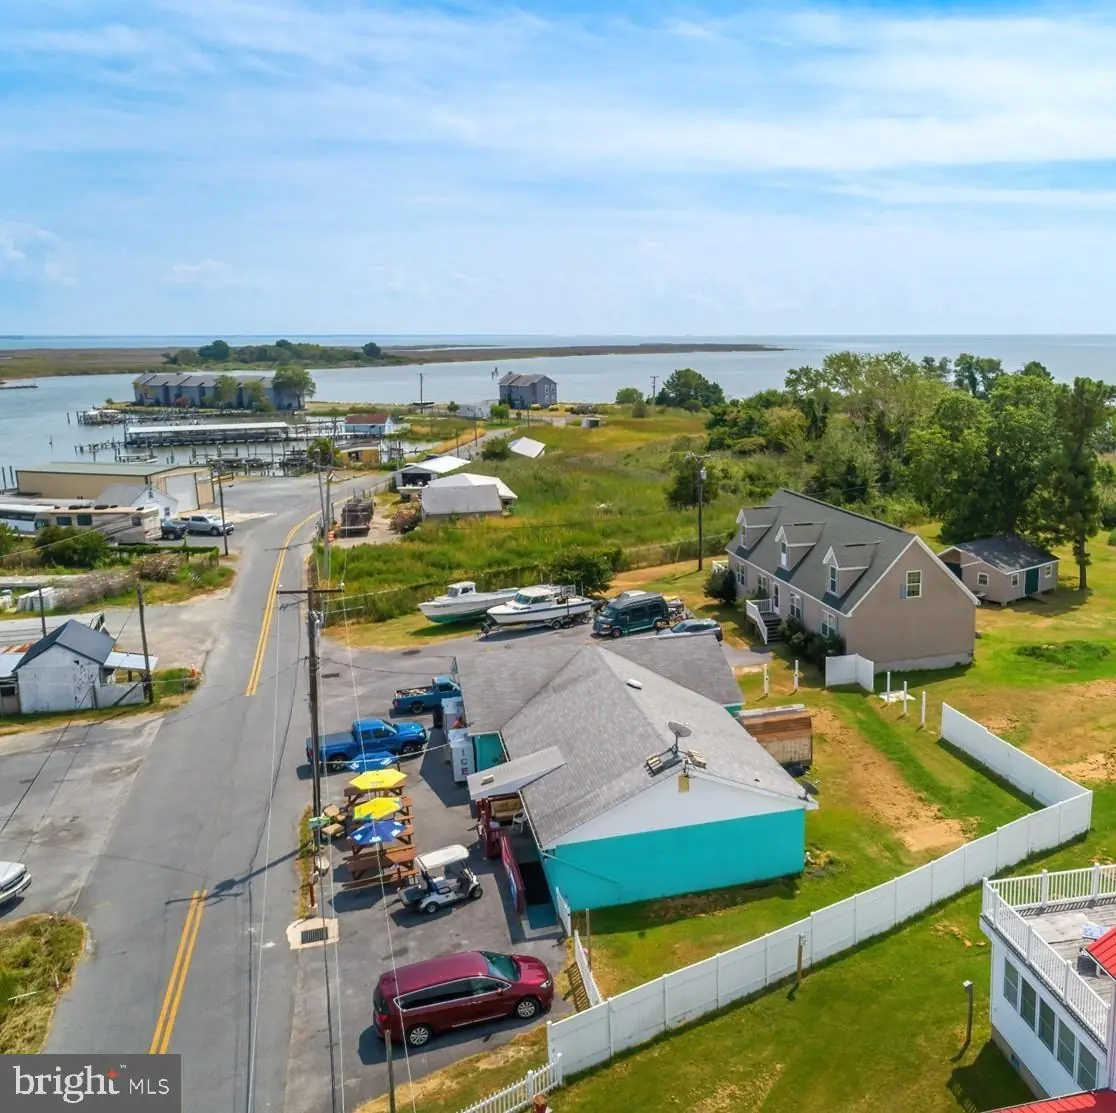 MDSO2003732-802638974040-2023-09-28-10-56-03 8952 Deal Island Rd | Deal Island, MD Real Estate For Sale | MLS# Mdso2003732  - Ocean Atlantic